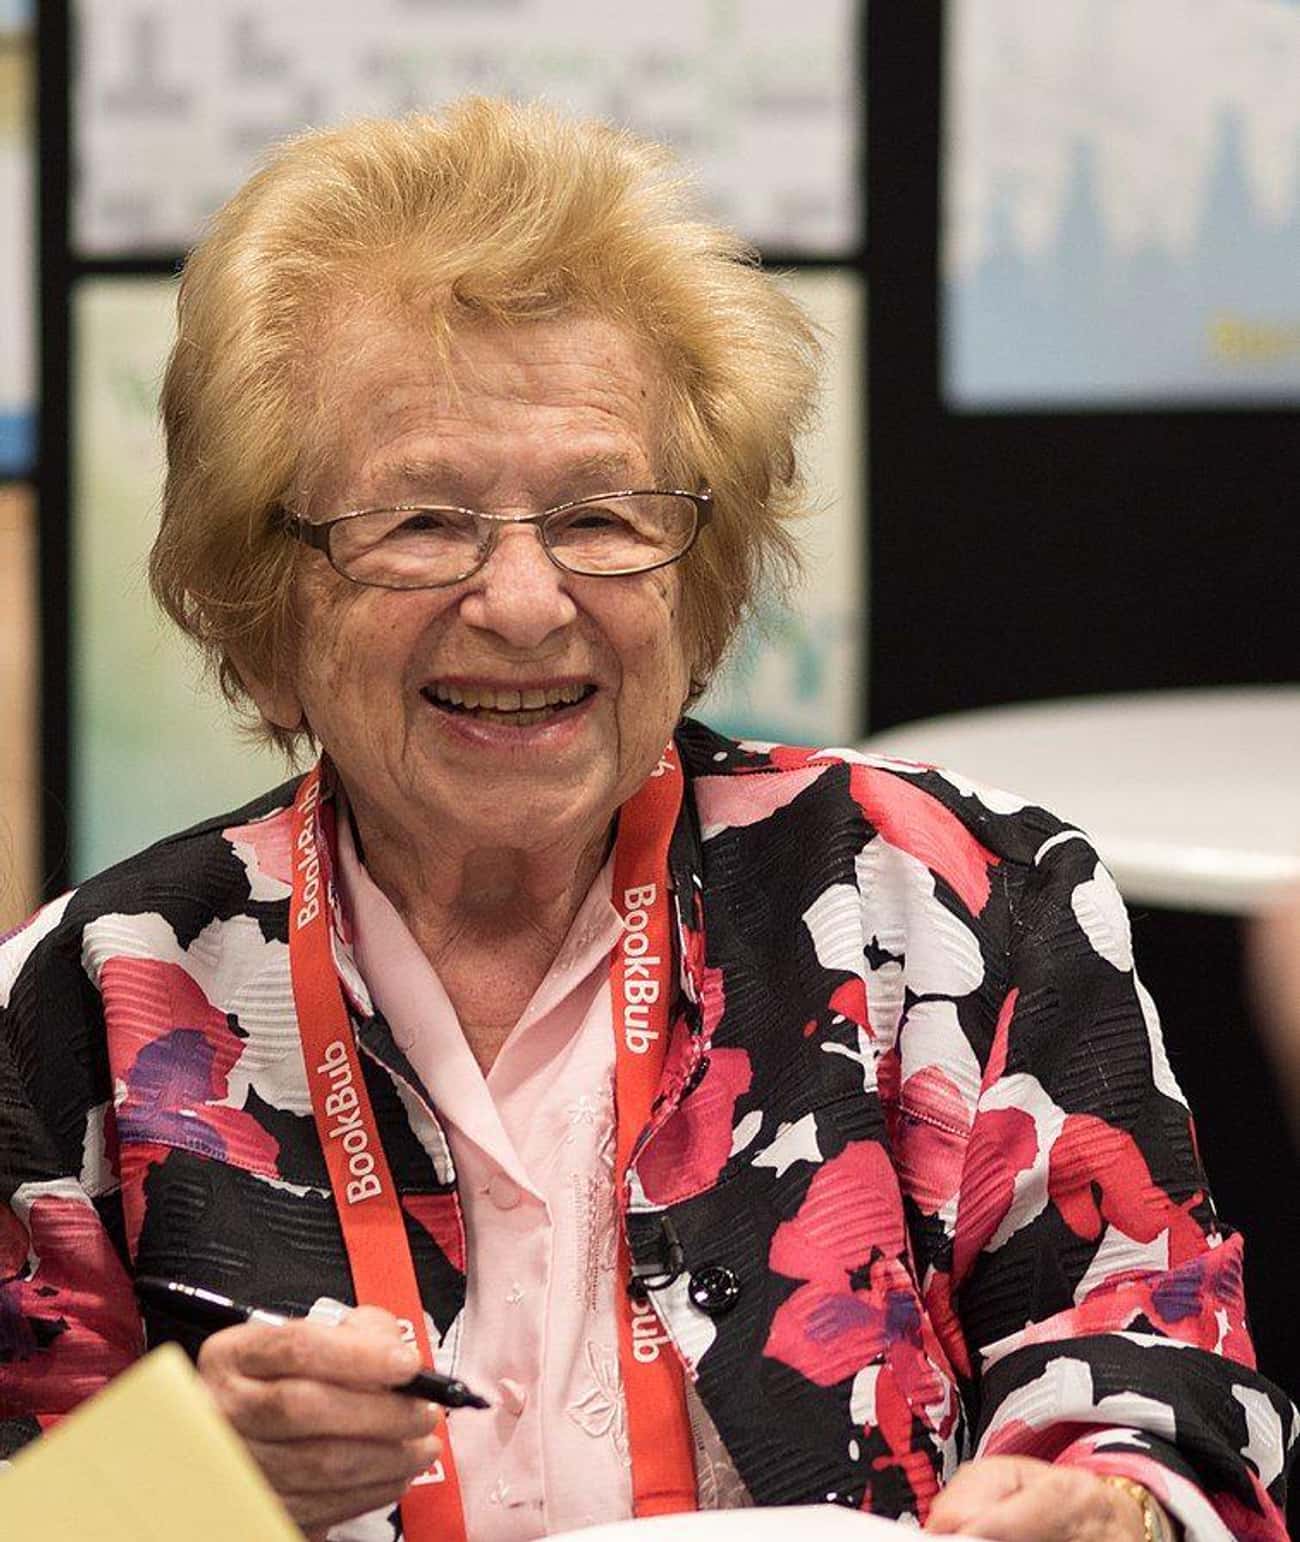 Sex Therapist Dr. Ruth Westheimer Was A Sniper For A Military Group In Israel